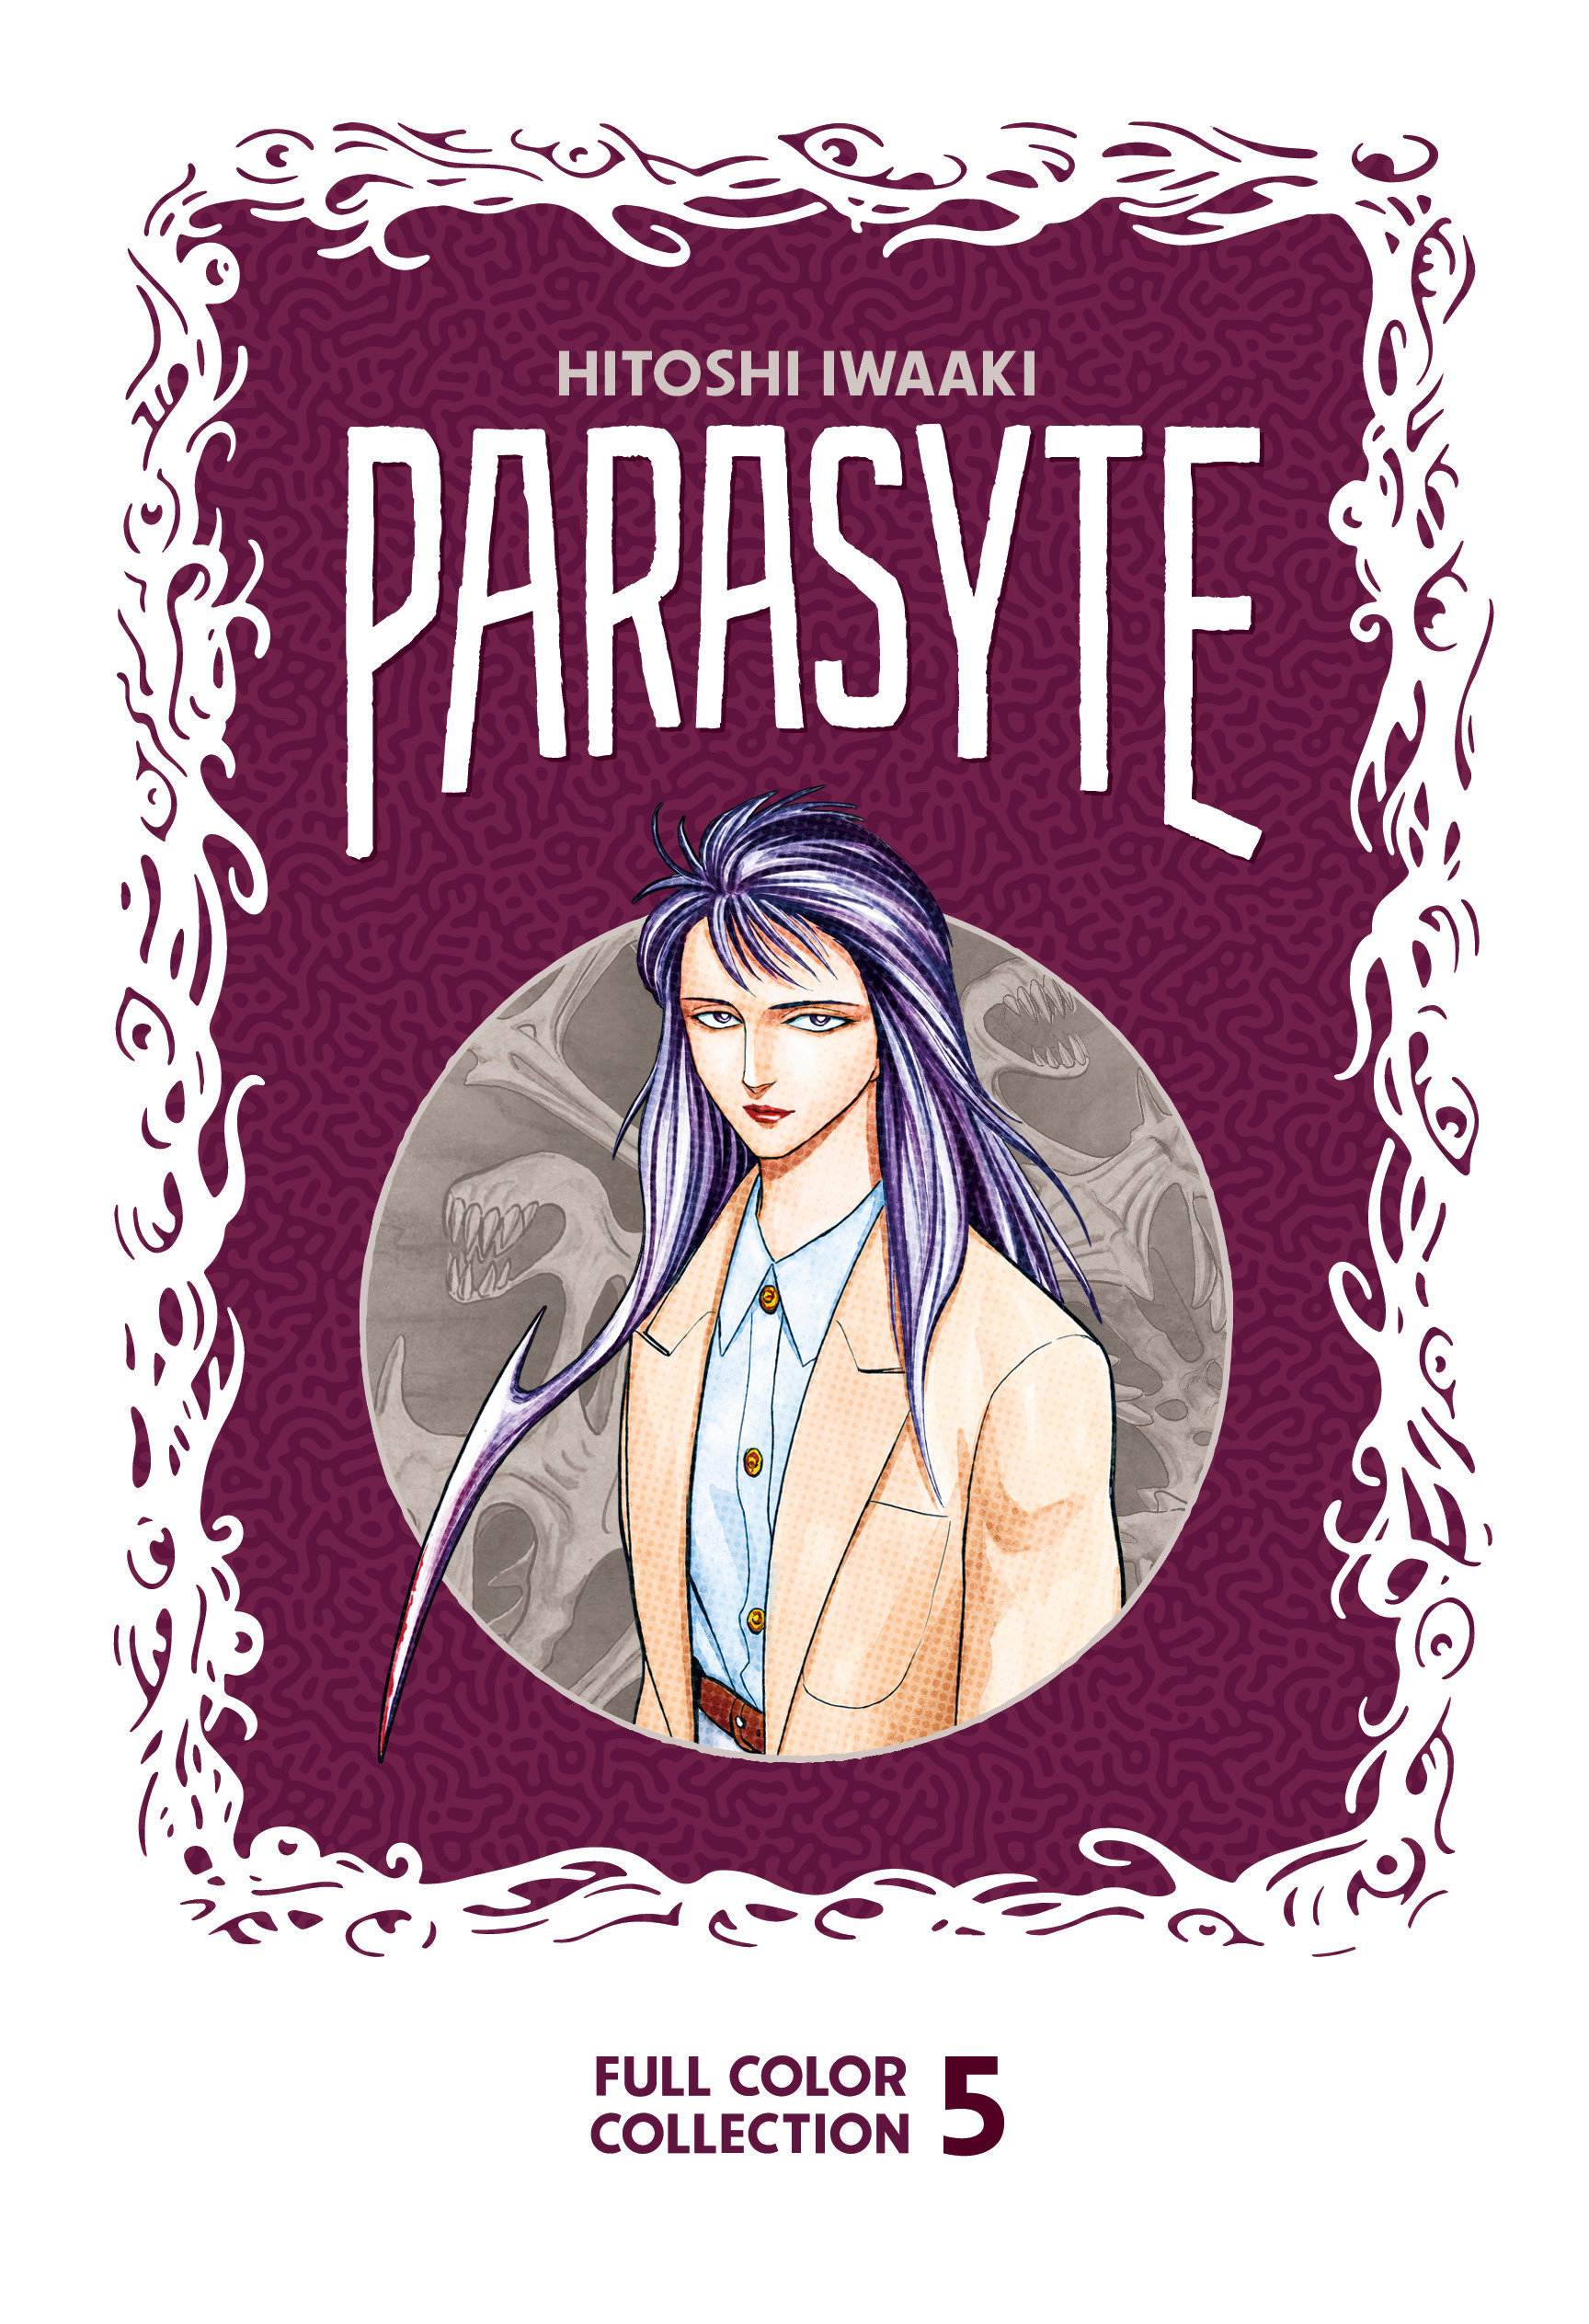 Parasyte Full Color Collection Manga Hardcover 5 (Mature)